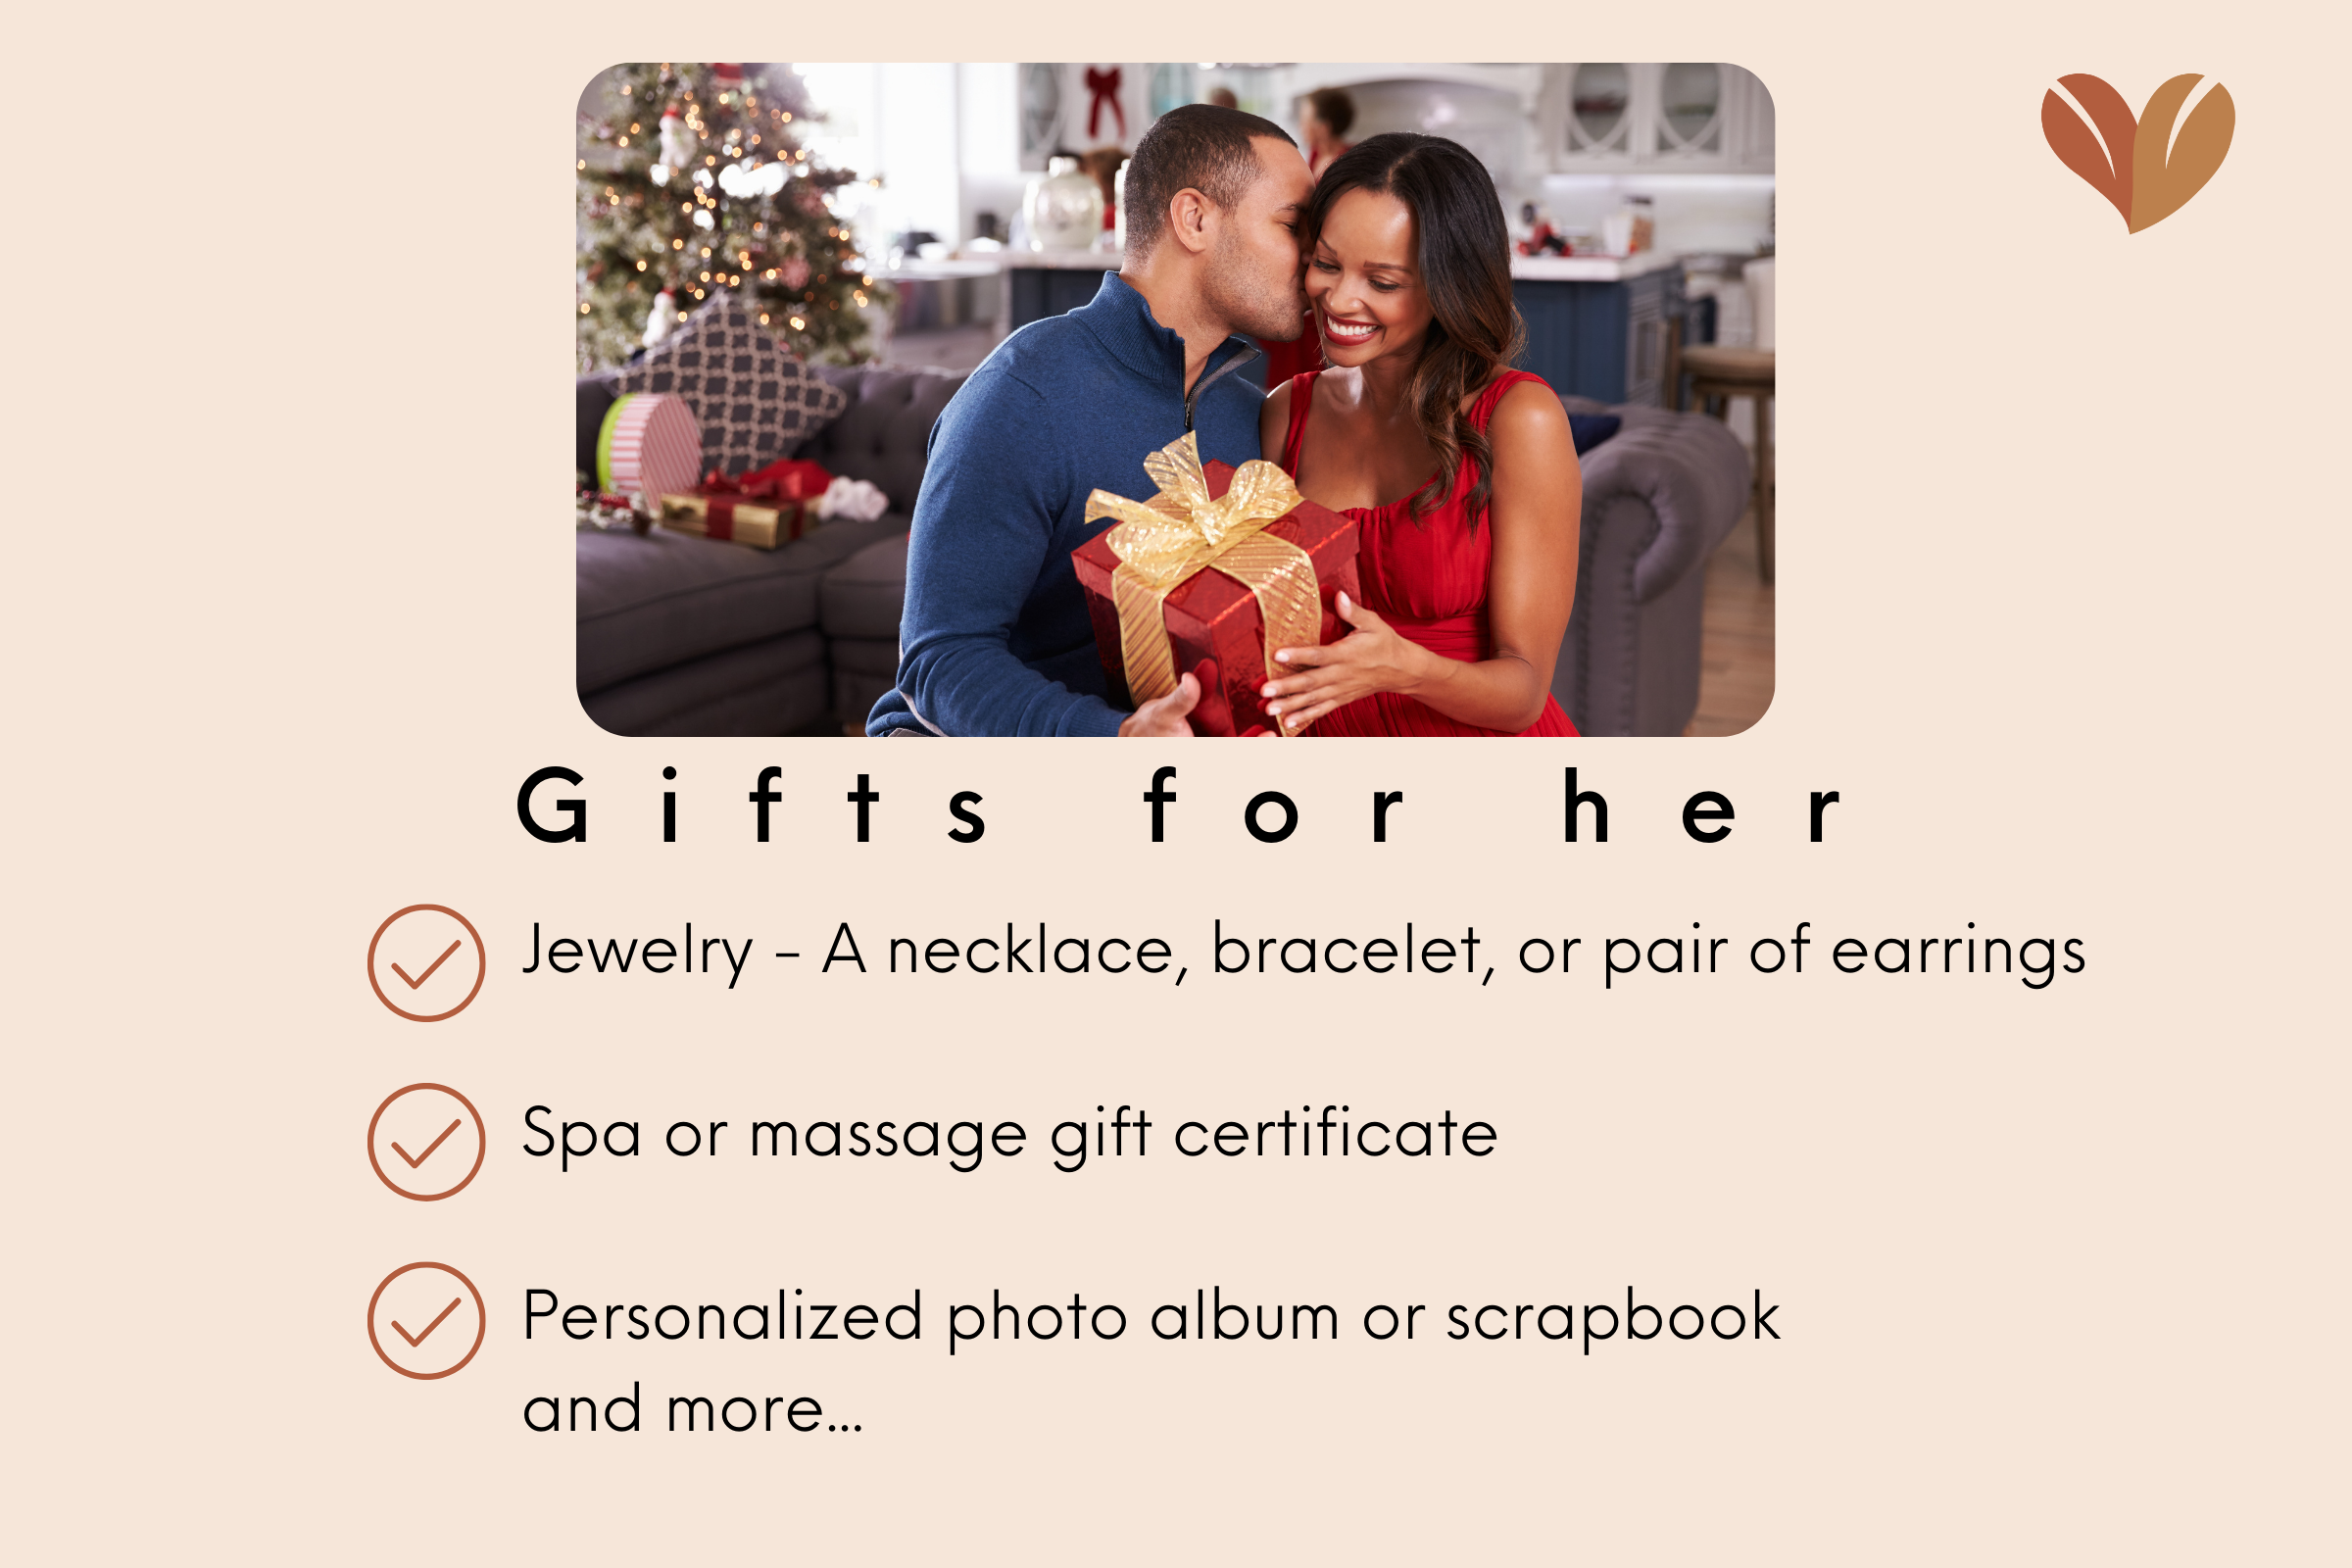 Suggested gifts for her